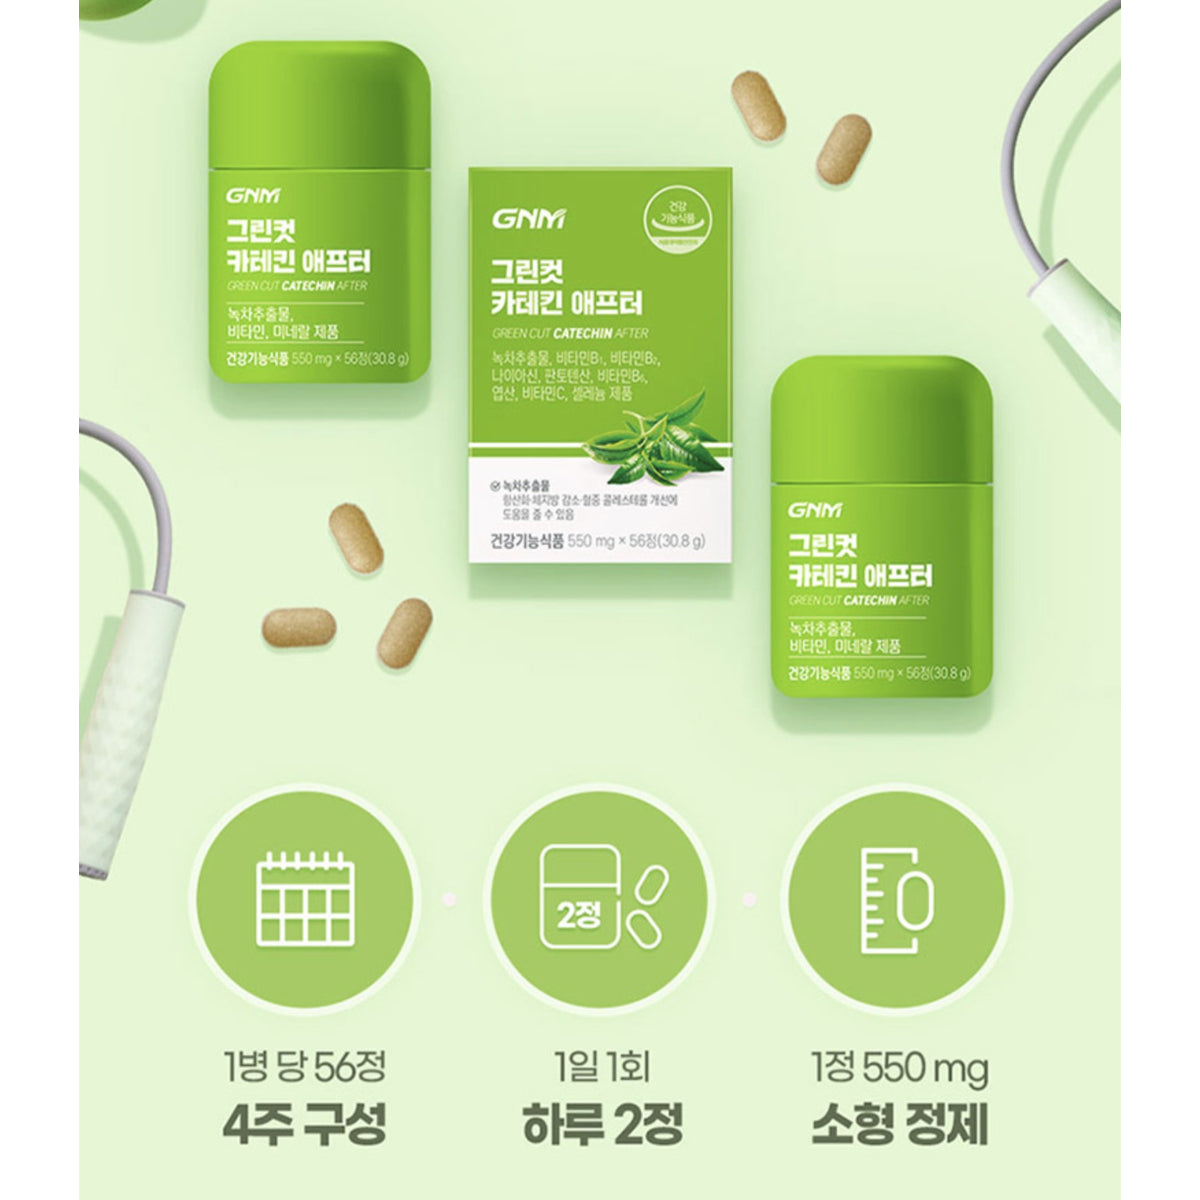 GNM Green Cut Catechin After Green Tea Extract for healthy diet for 12 weeks 56tabs/Bottle Vitamin B C Selenium Pantothenate / from Seoul, Korea